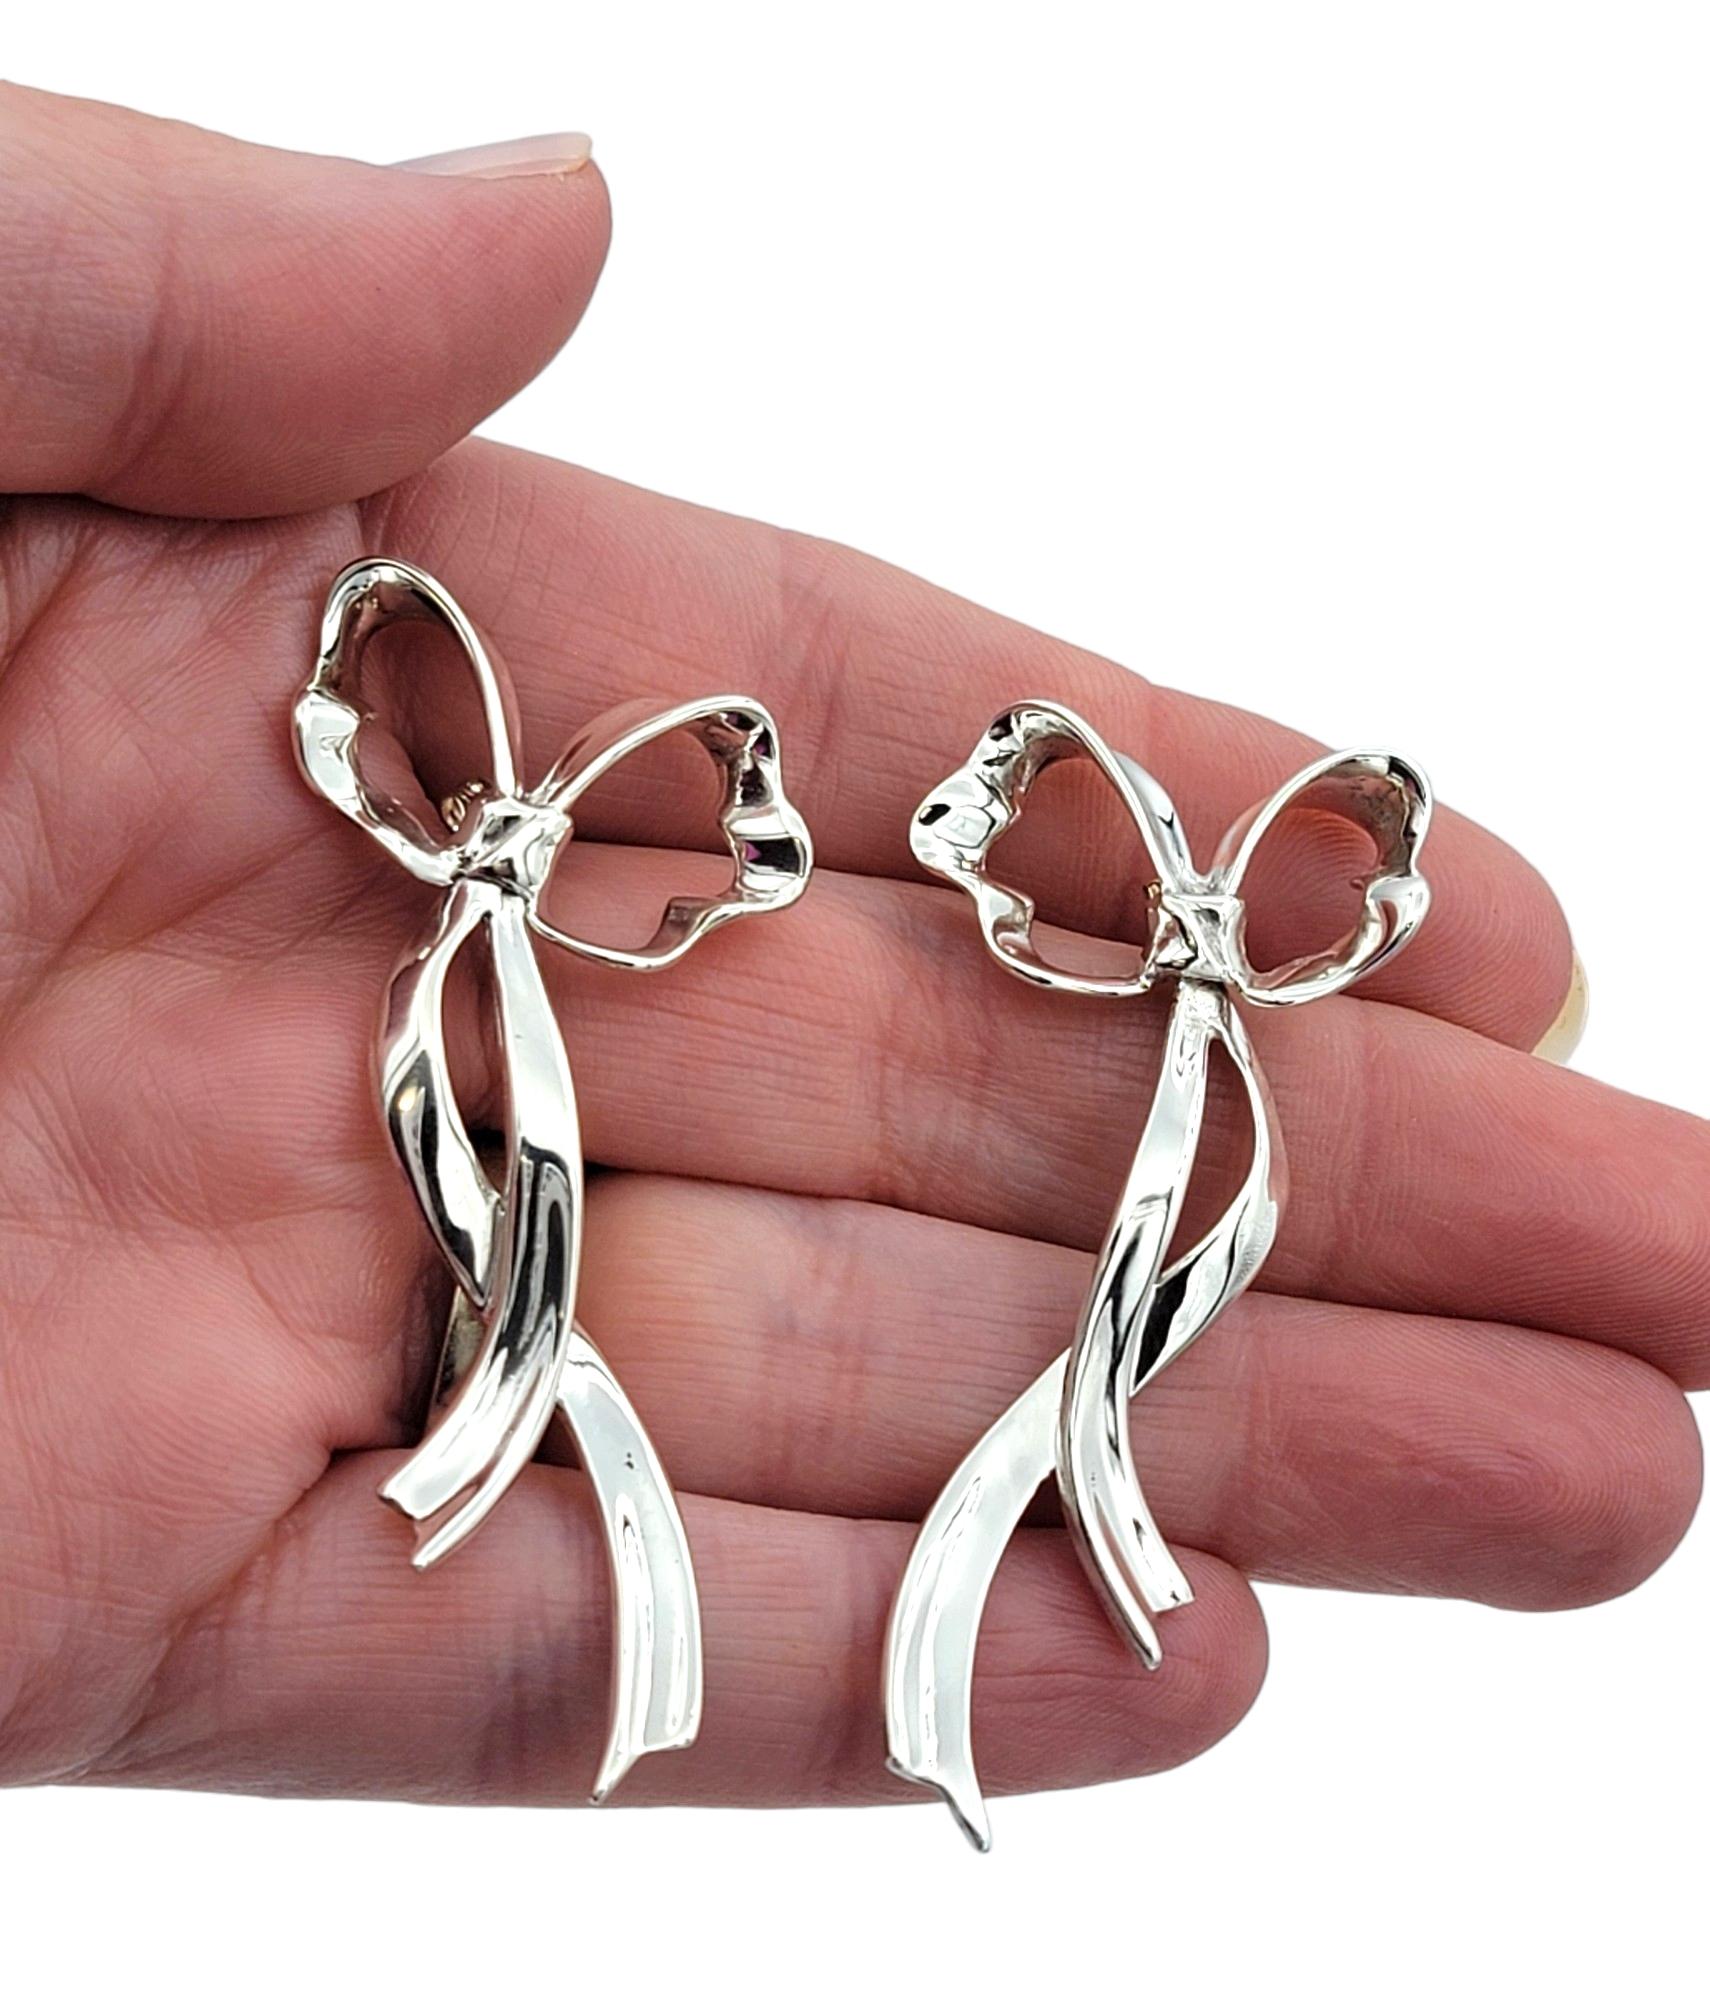 Vintage Tiffany & Co. Large Ribbon Bow Earrings Set in Polished Sterling Silver For Sale 3